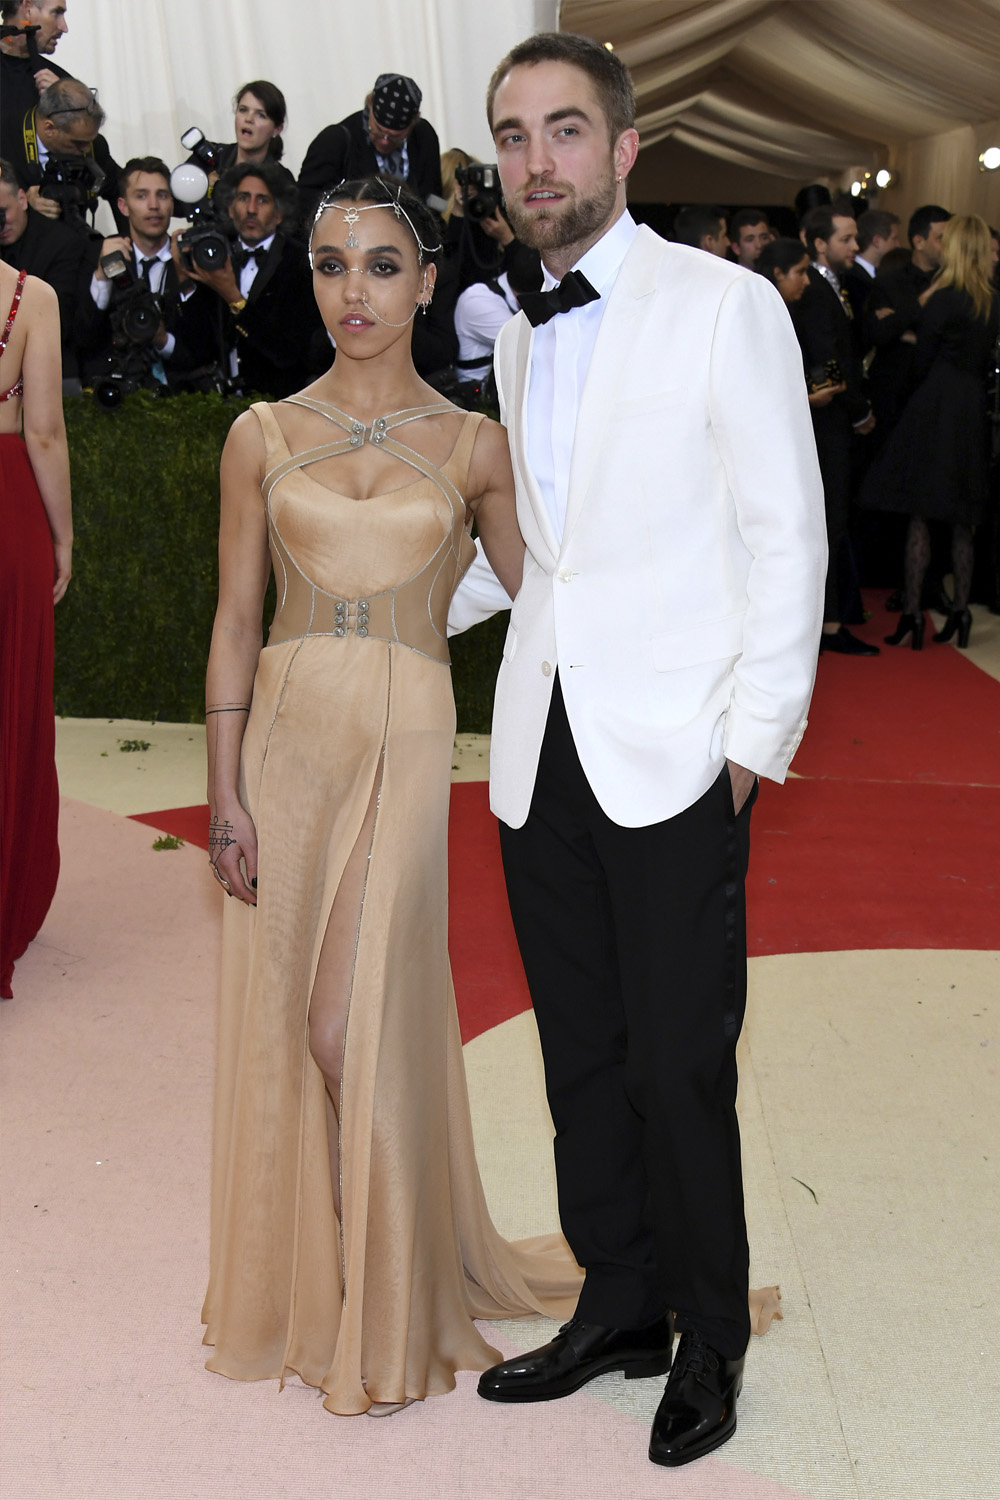 FKA twigs in Atelier Versace and Robert Pattinson in Dior Homme.